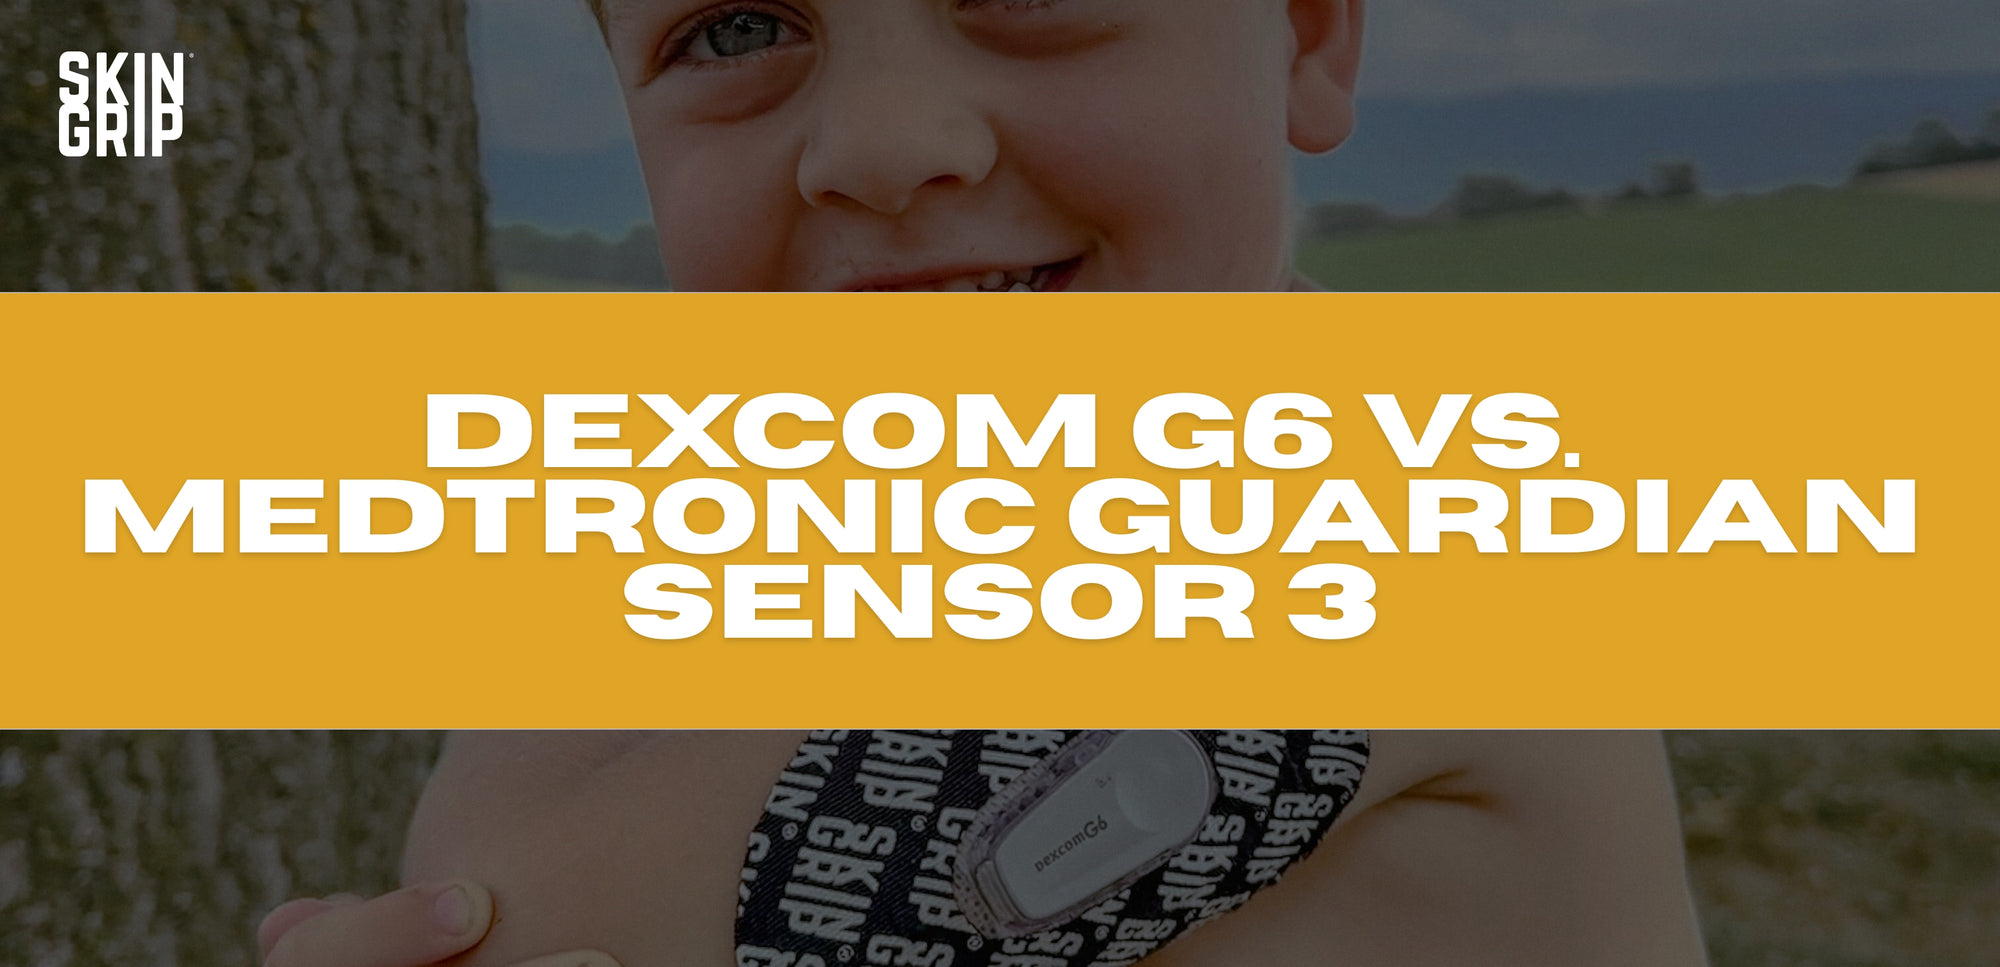 Dexcom G6 vs Medtronic Guardian Sensor 3: Which is The Best CGM Option for You?